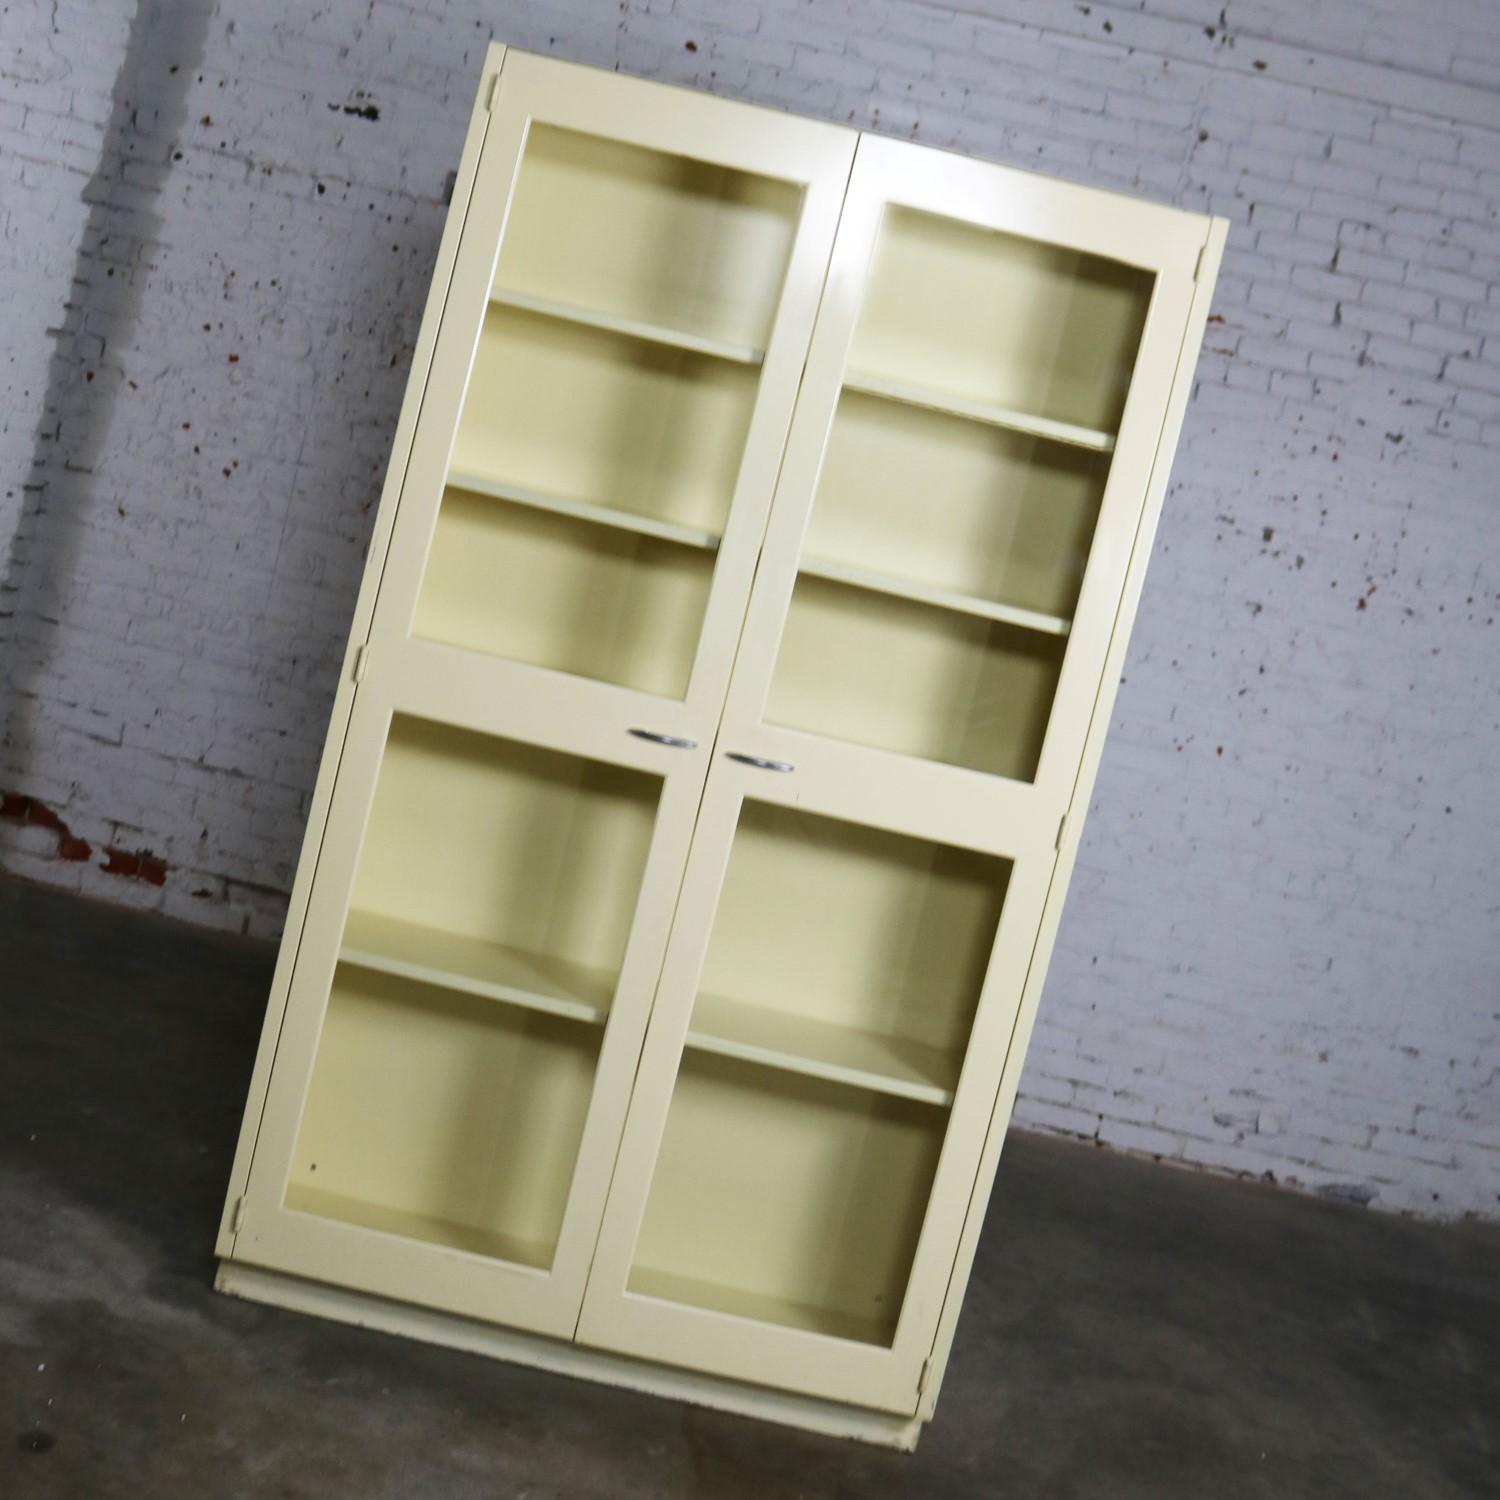 Awesome industrial metal storage cabinets with glass double opening doors. Fabulous for display or as a bookcase. They are both in wonderful vintage condition, and the ivory painted finish has a nice age patina including scratches and nicks. Please